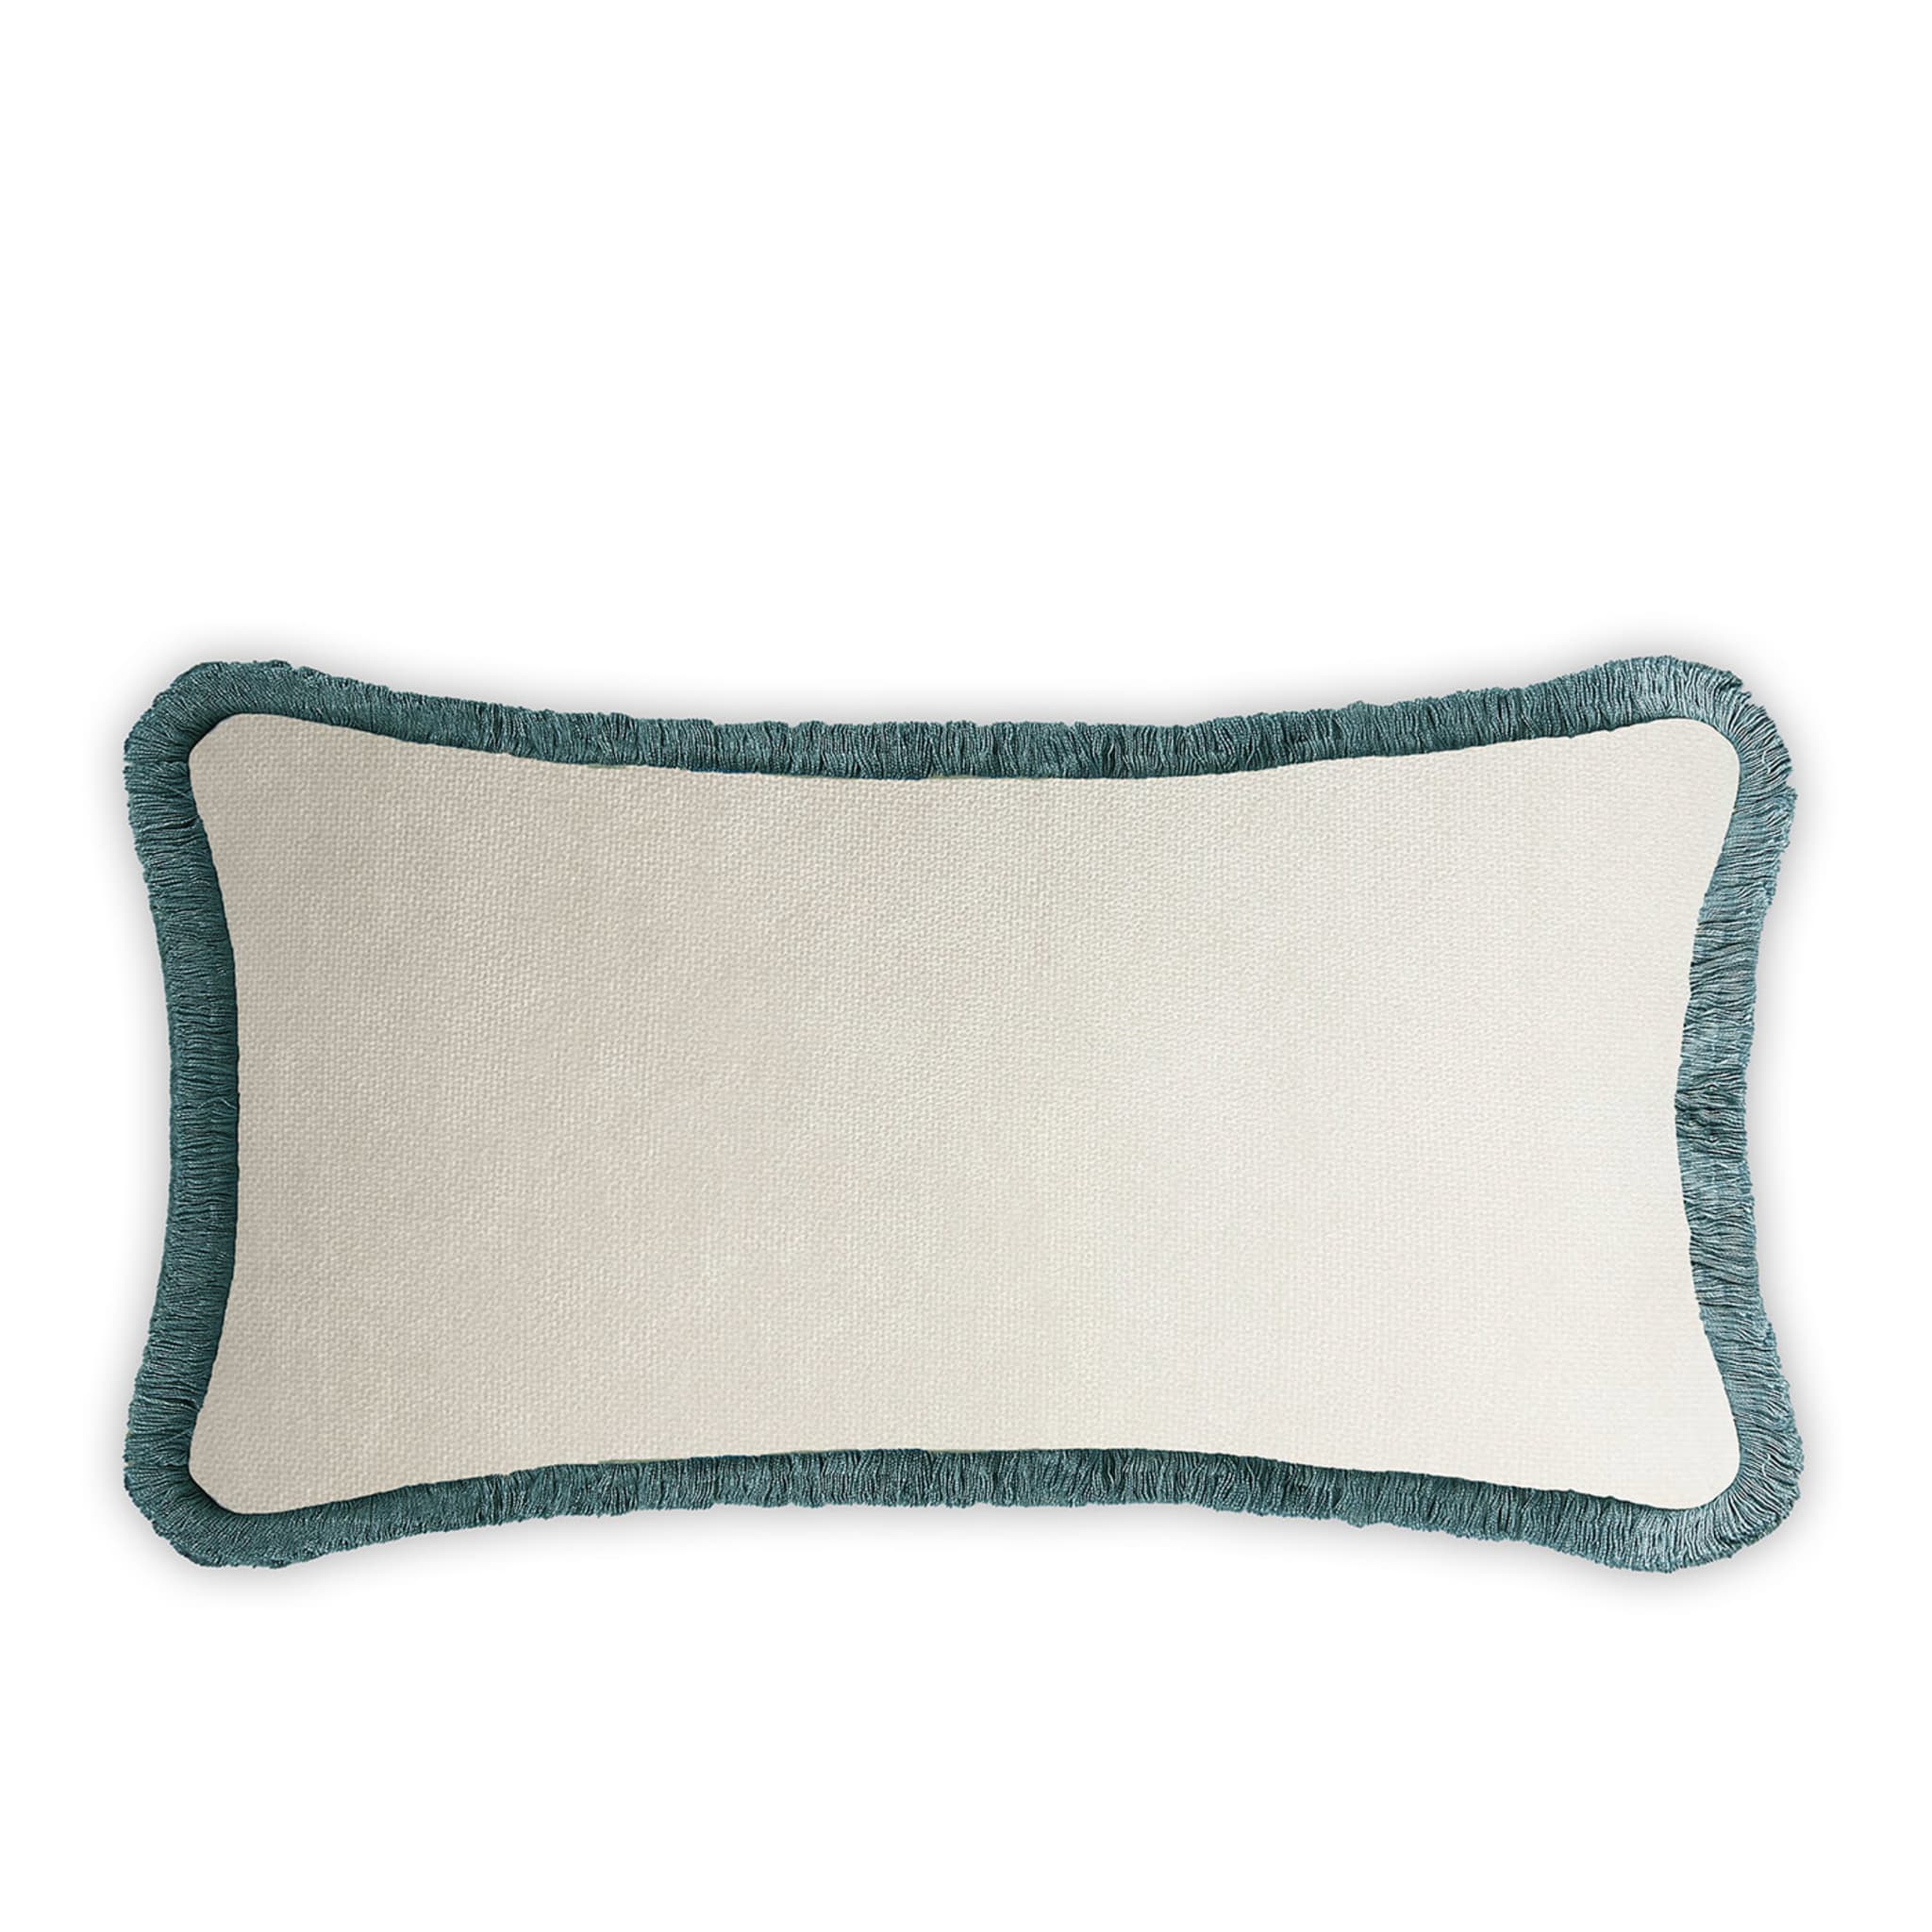 Couple Rectangle Teal And White Velvet Happy Cushion - Alternative view 1